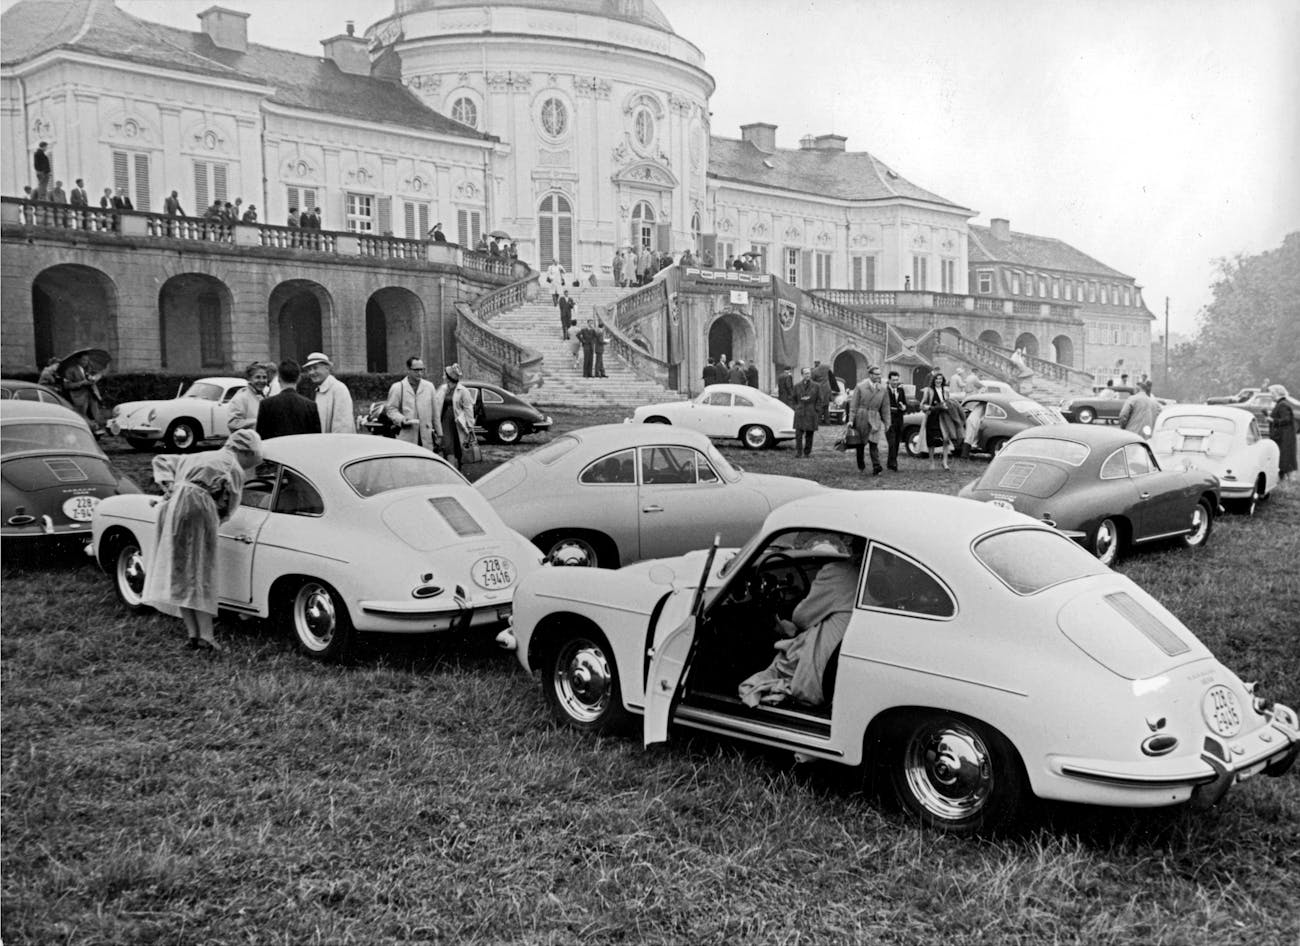 Collection of Porsche 356 cars at Solitude castle, Germany, 1960